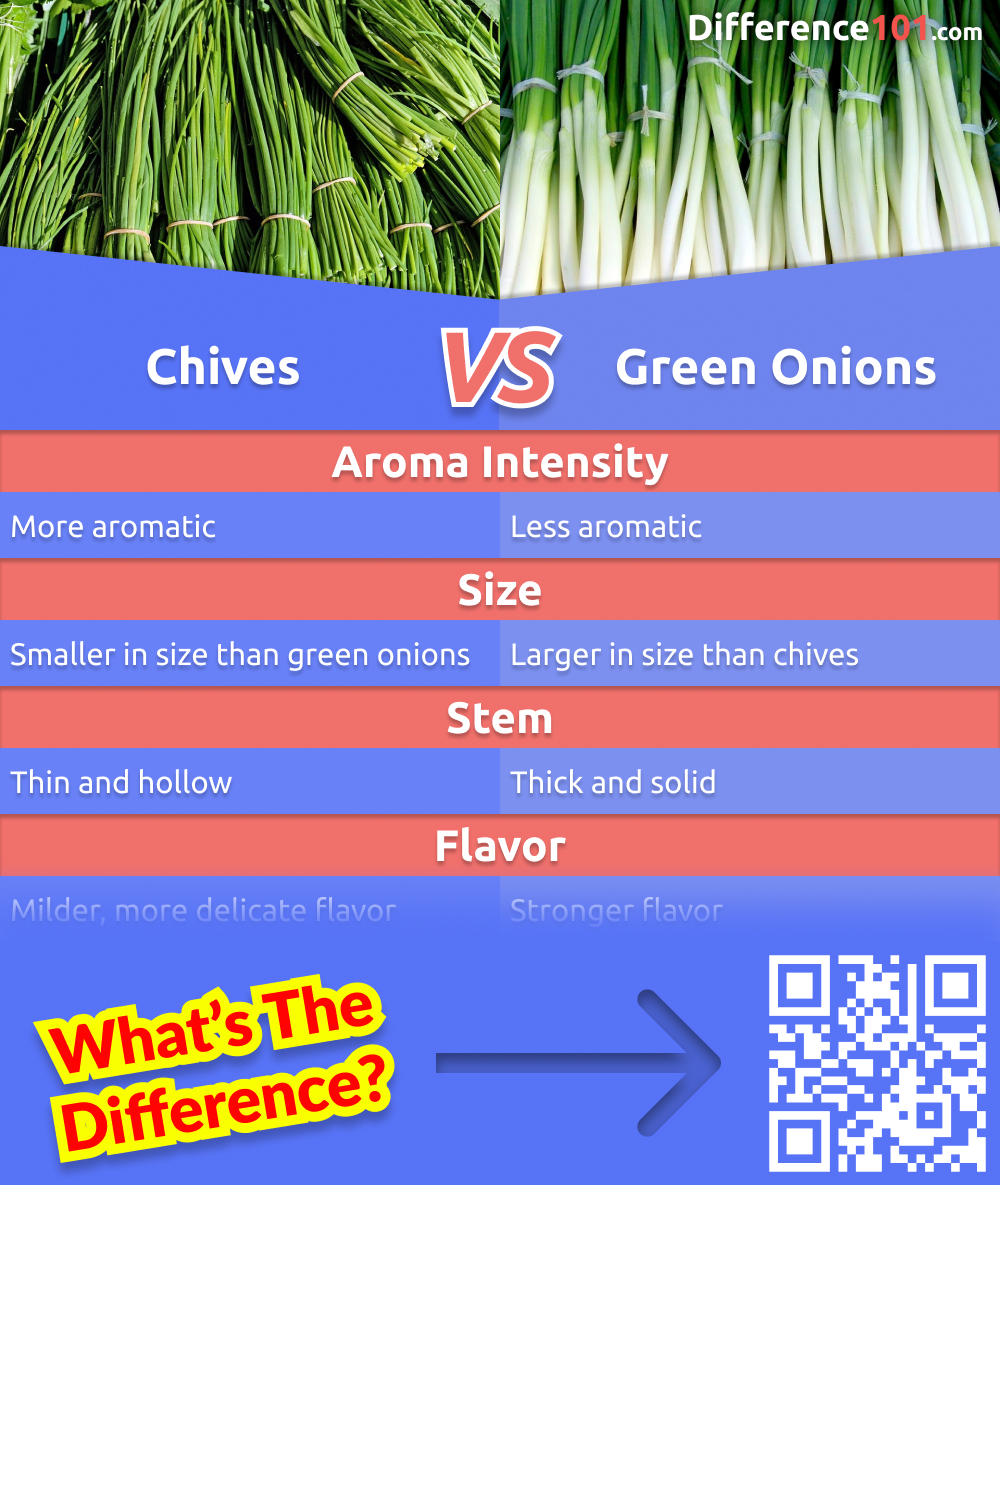 Chives and green onions are both often used as garnishes or as flavorings in many dishes, but what's the difference between them? Read on to learn more about the pros and cons of each and their key differences. 